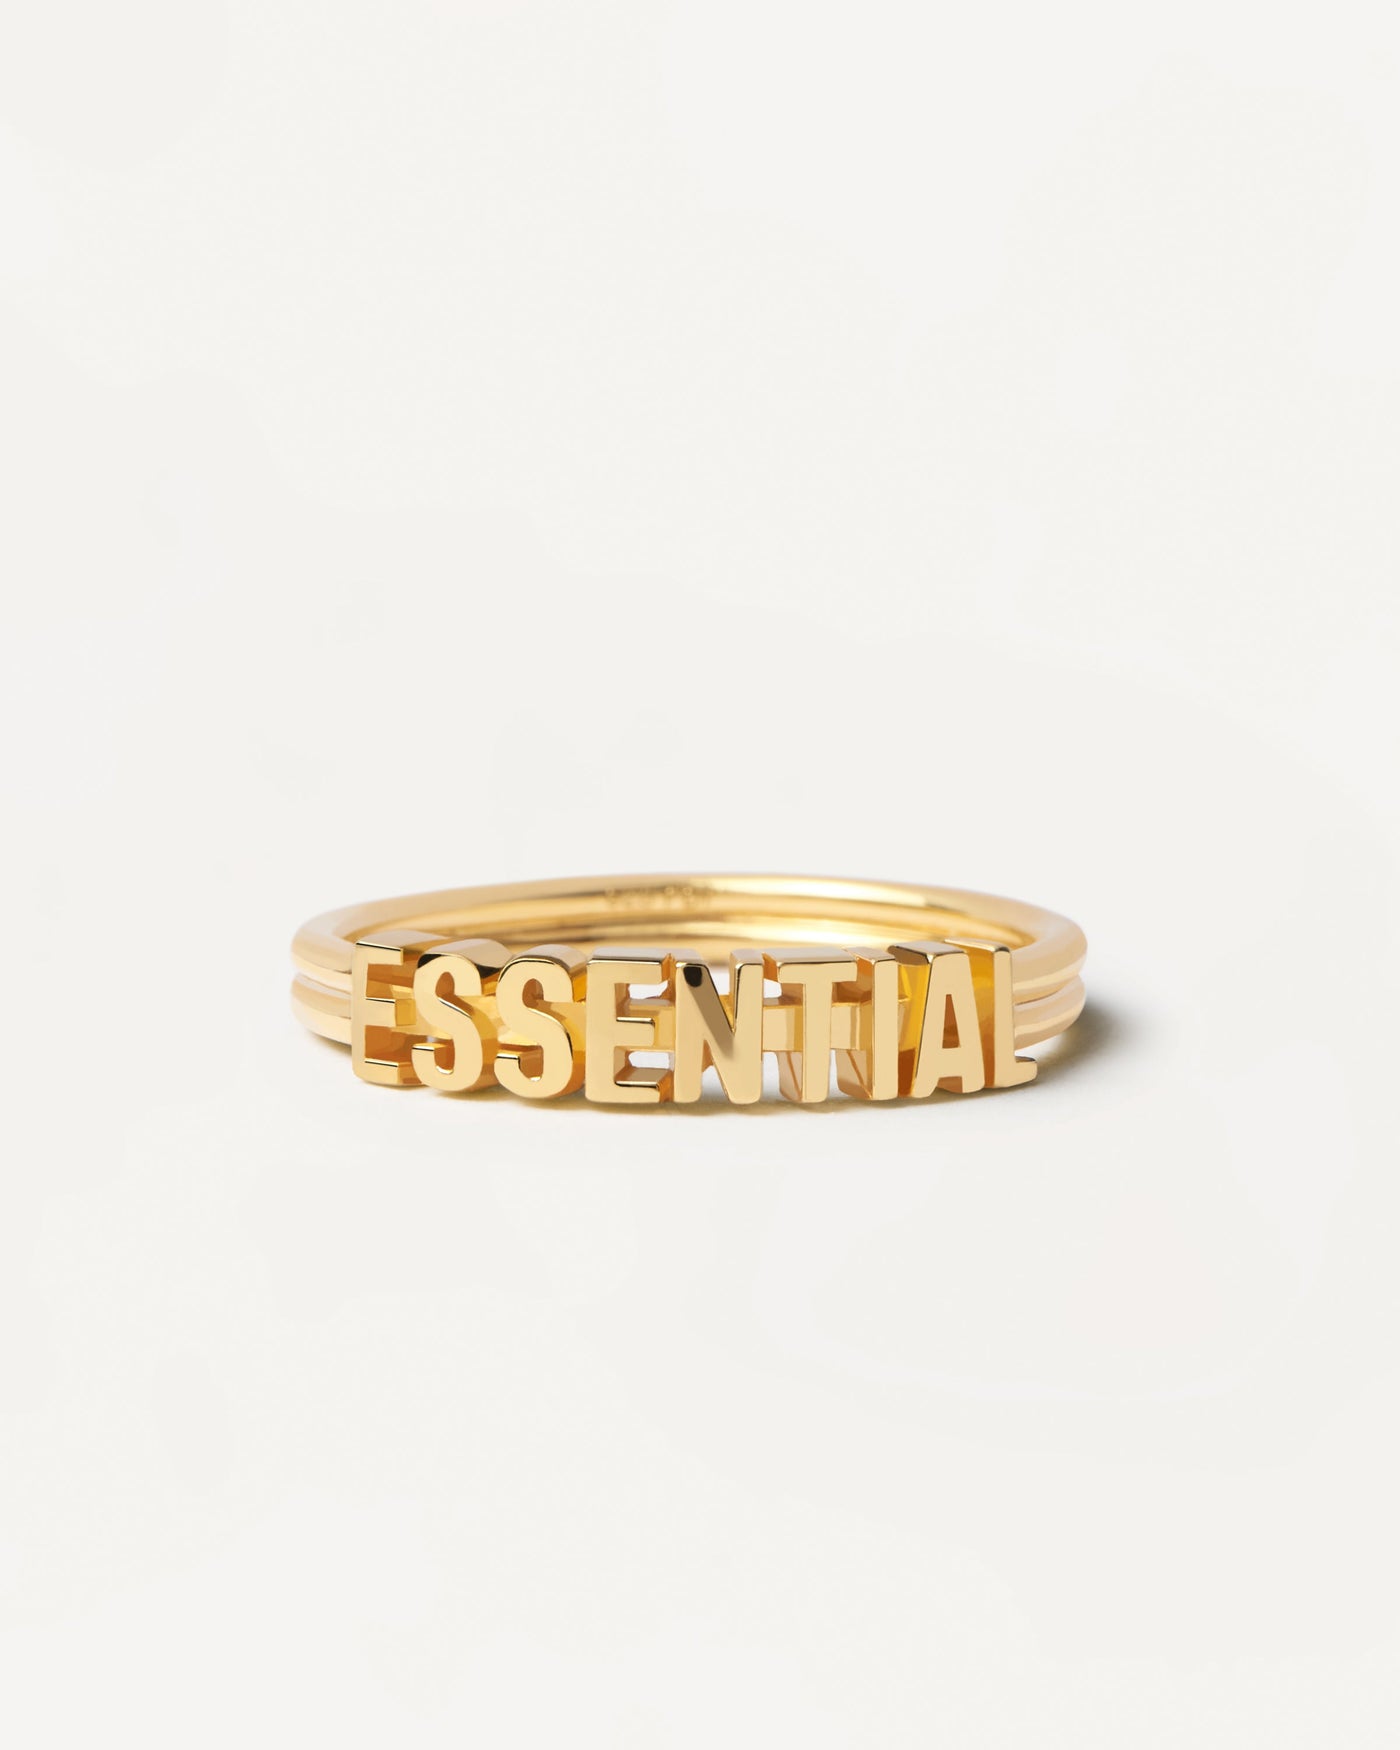 2023 Selection | Essential Ring. Essential claim ring in gold-plated silver with 3 bands design. Get the latest arrival from PDPAOLA. Place your order safely and get this Best Seller. Free Shipping.